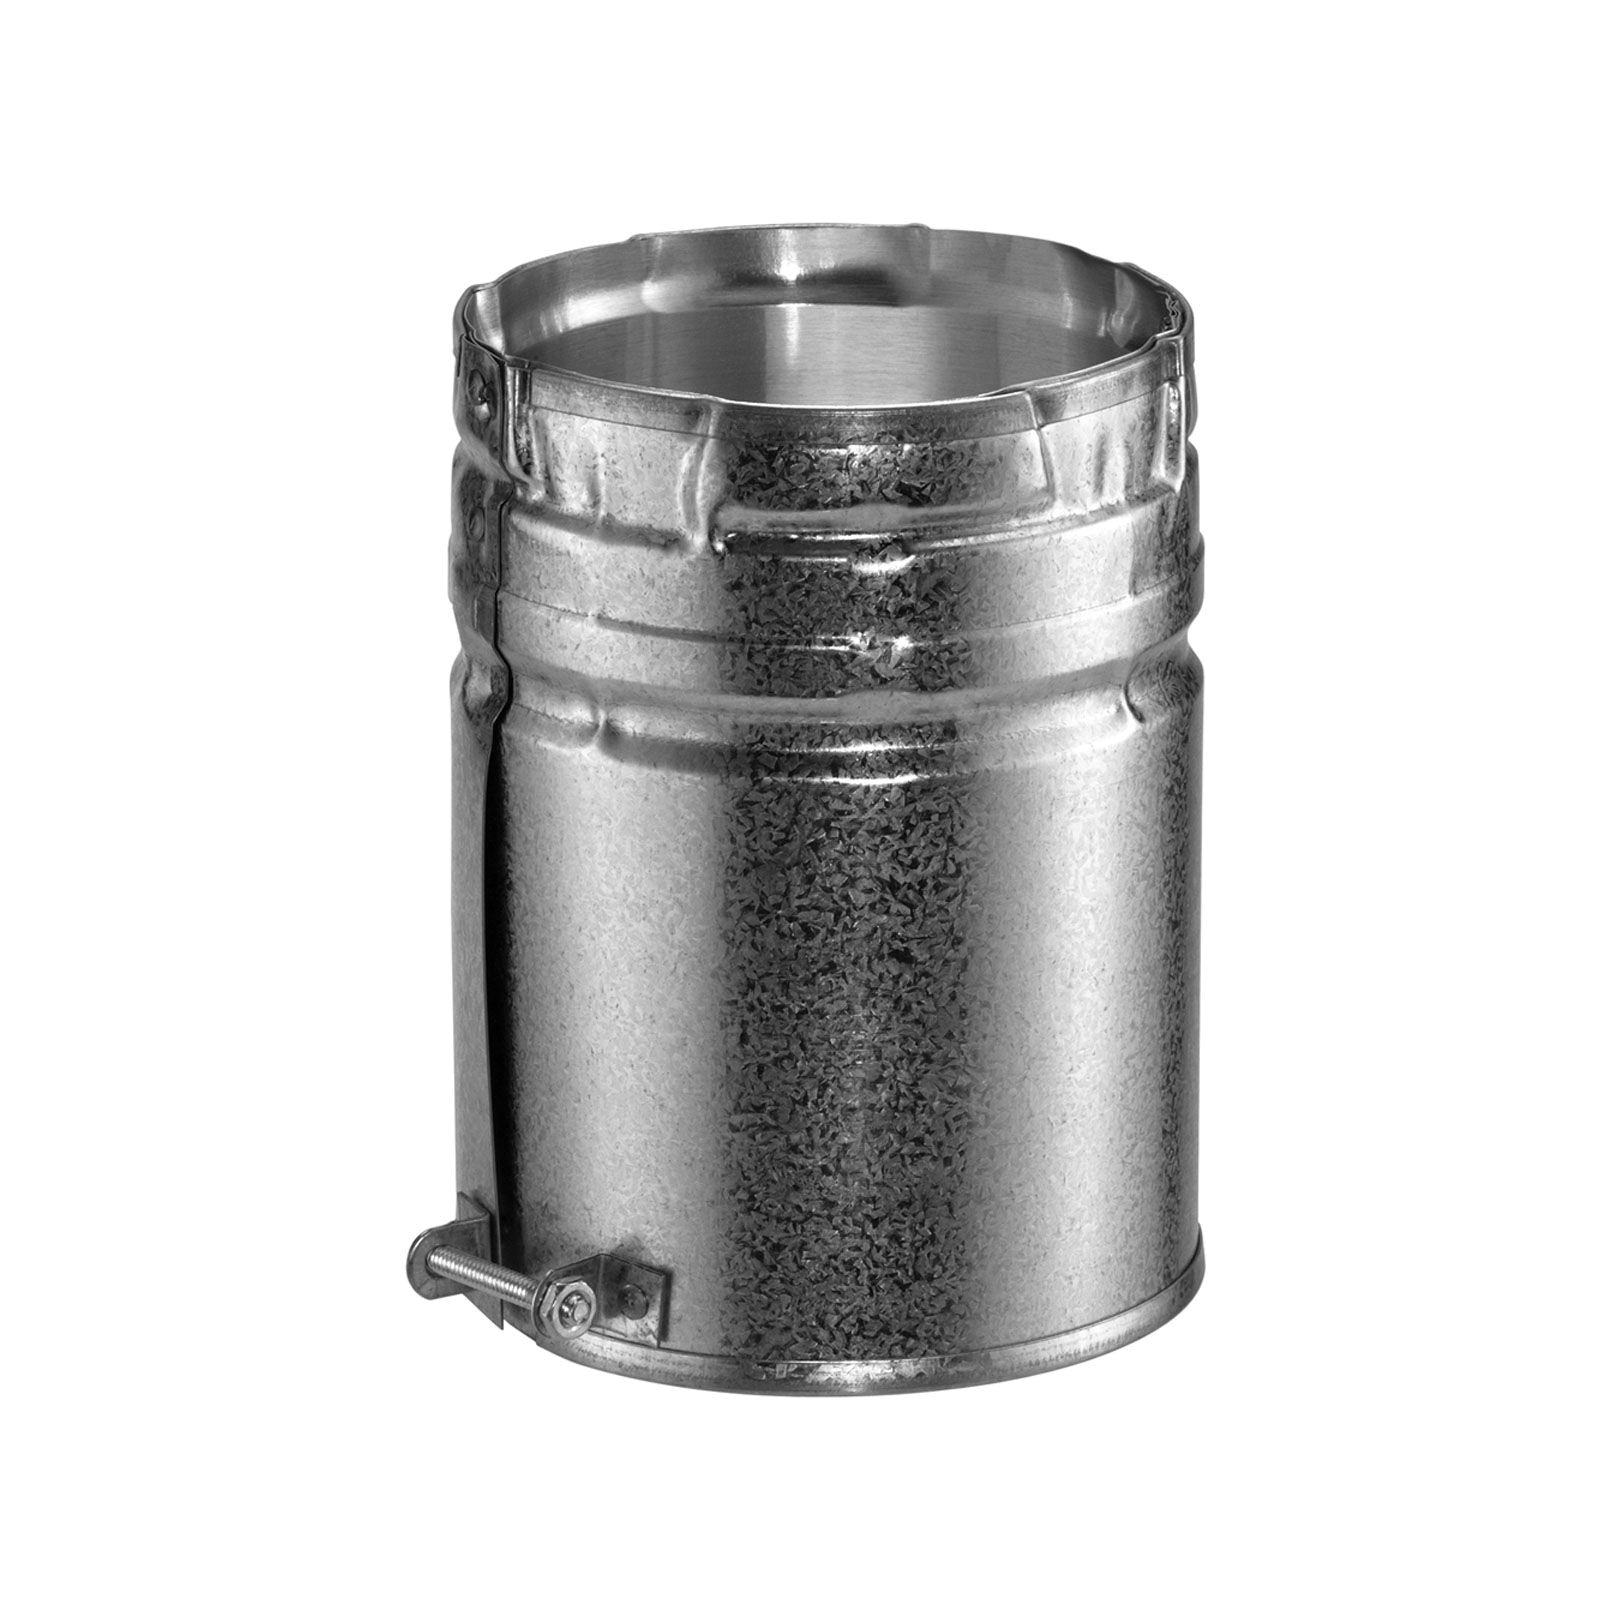 DuraVent® 5GVAM Male Adapter, 5 in, 0.012 in Aluminum Inner and 0.018 in Galvanized Steel Outer Wall